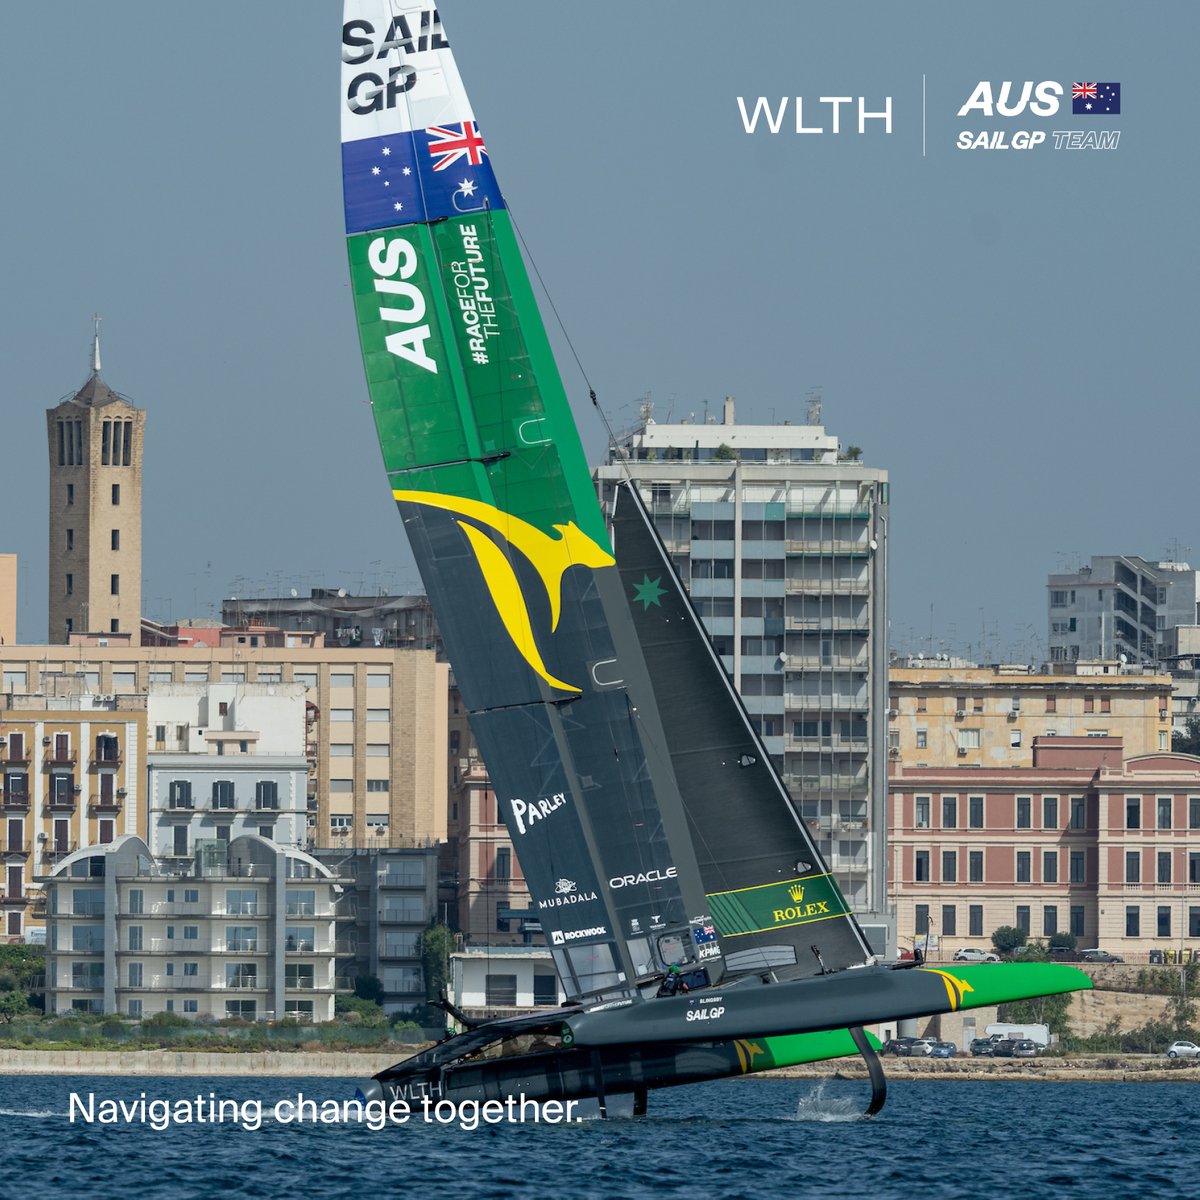 Get behind the green and gold Flying Roo! Purpose-led partnerships with the Australian SailGP Team and Parley for the Oceans.

#sailgp #parley #purposeled #impact #partnerships